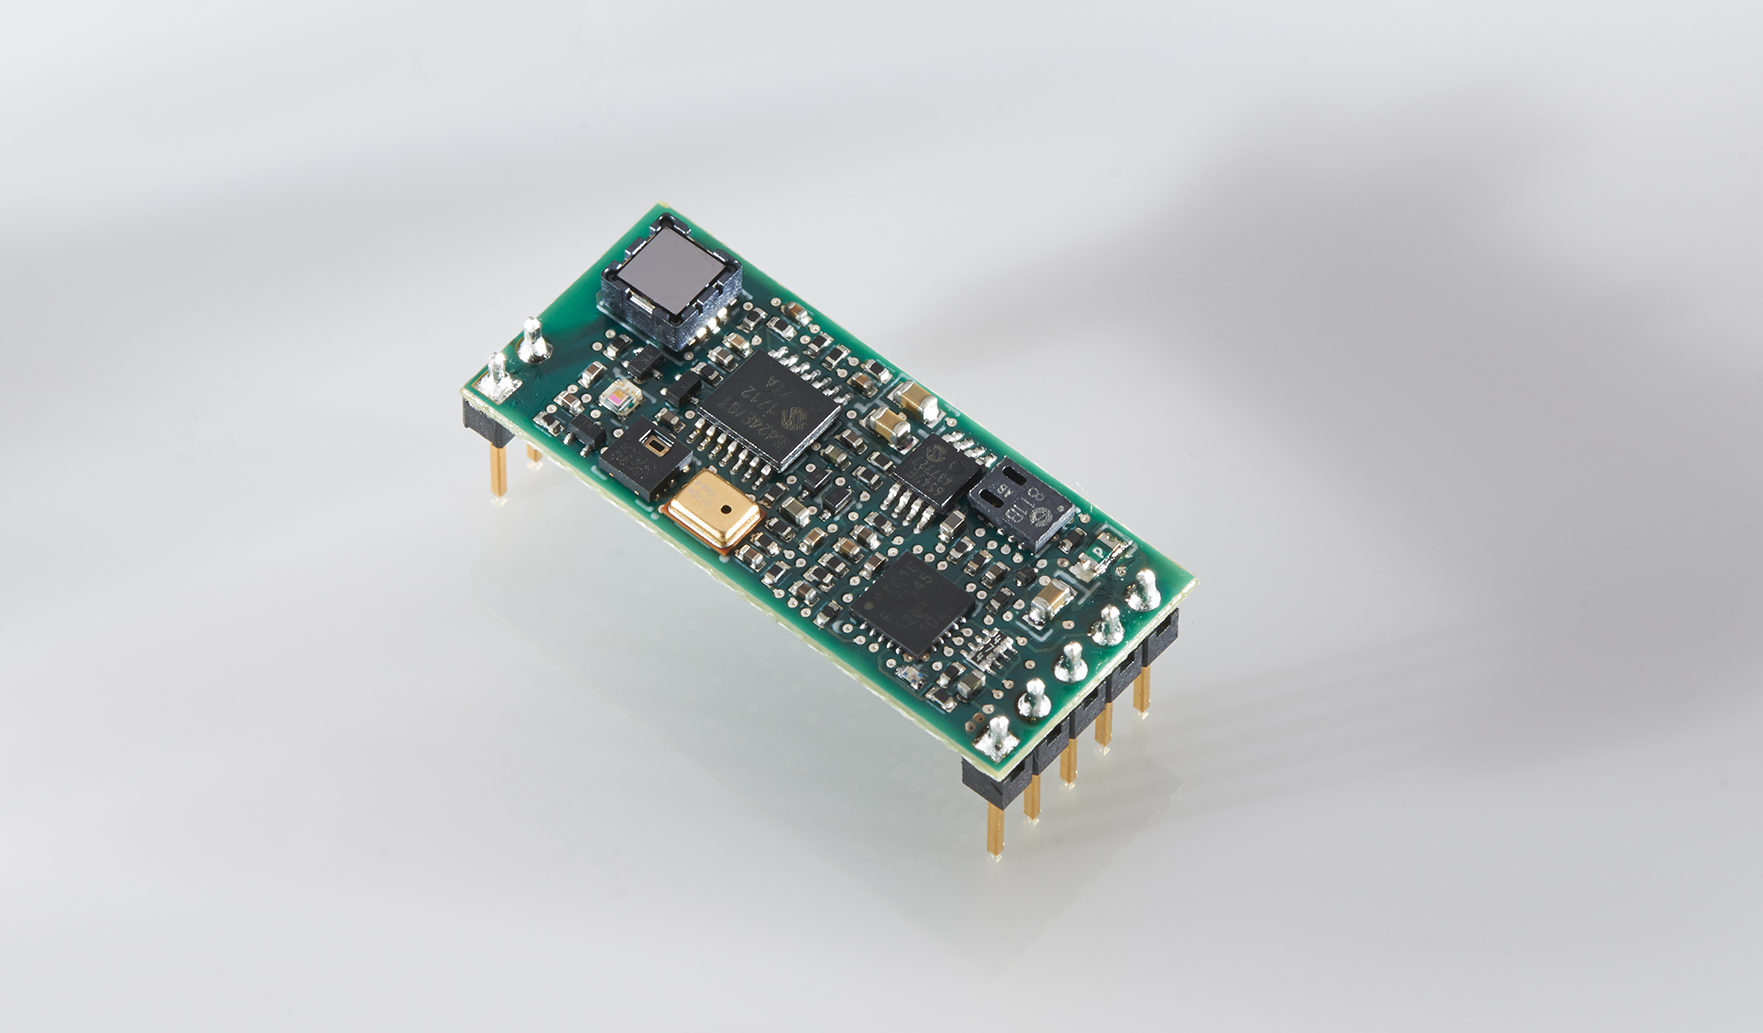 AmbiMate MS4 Multi-Sensor Module cuts time to market for smart building systems